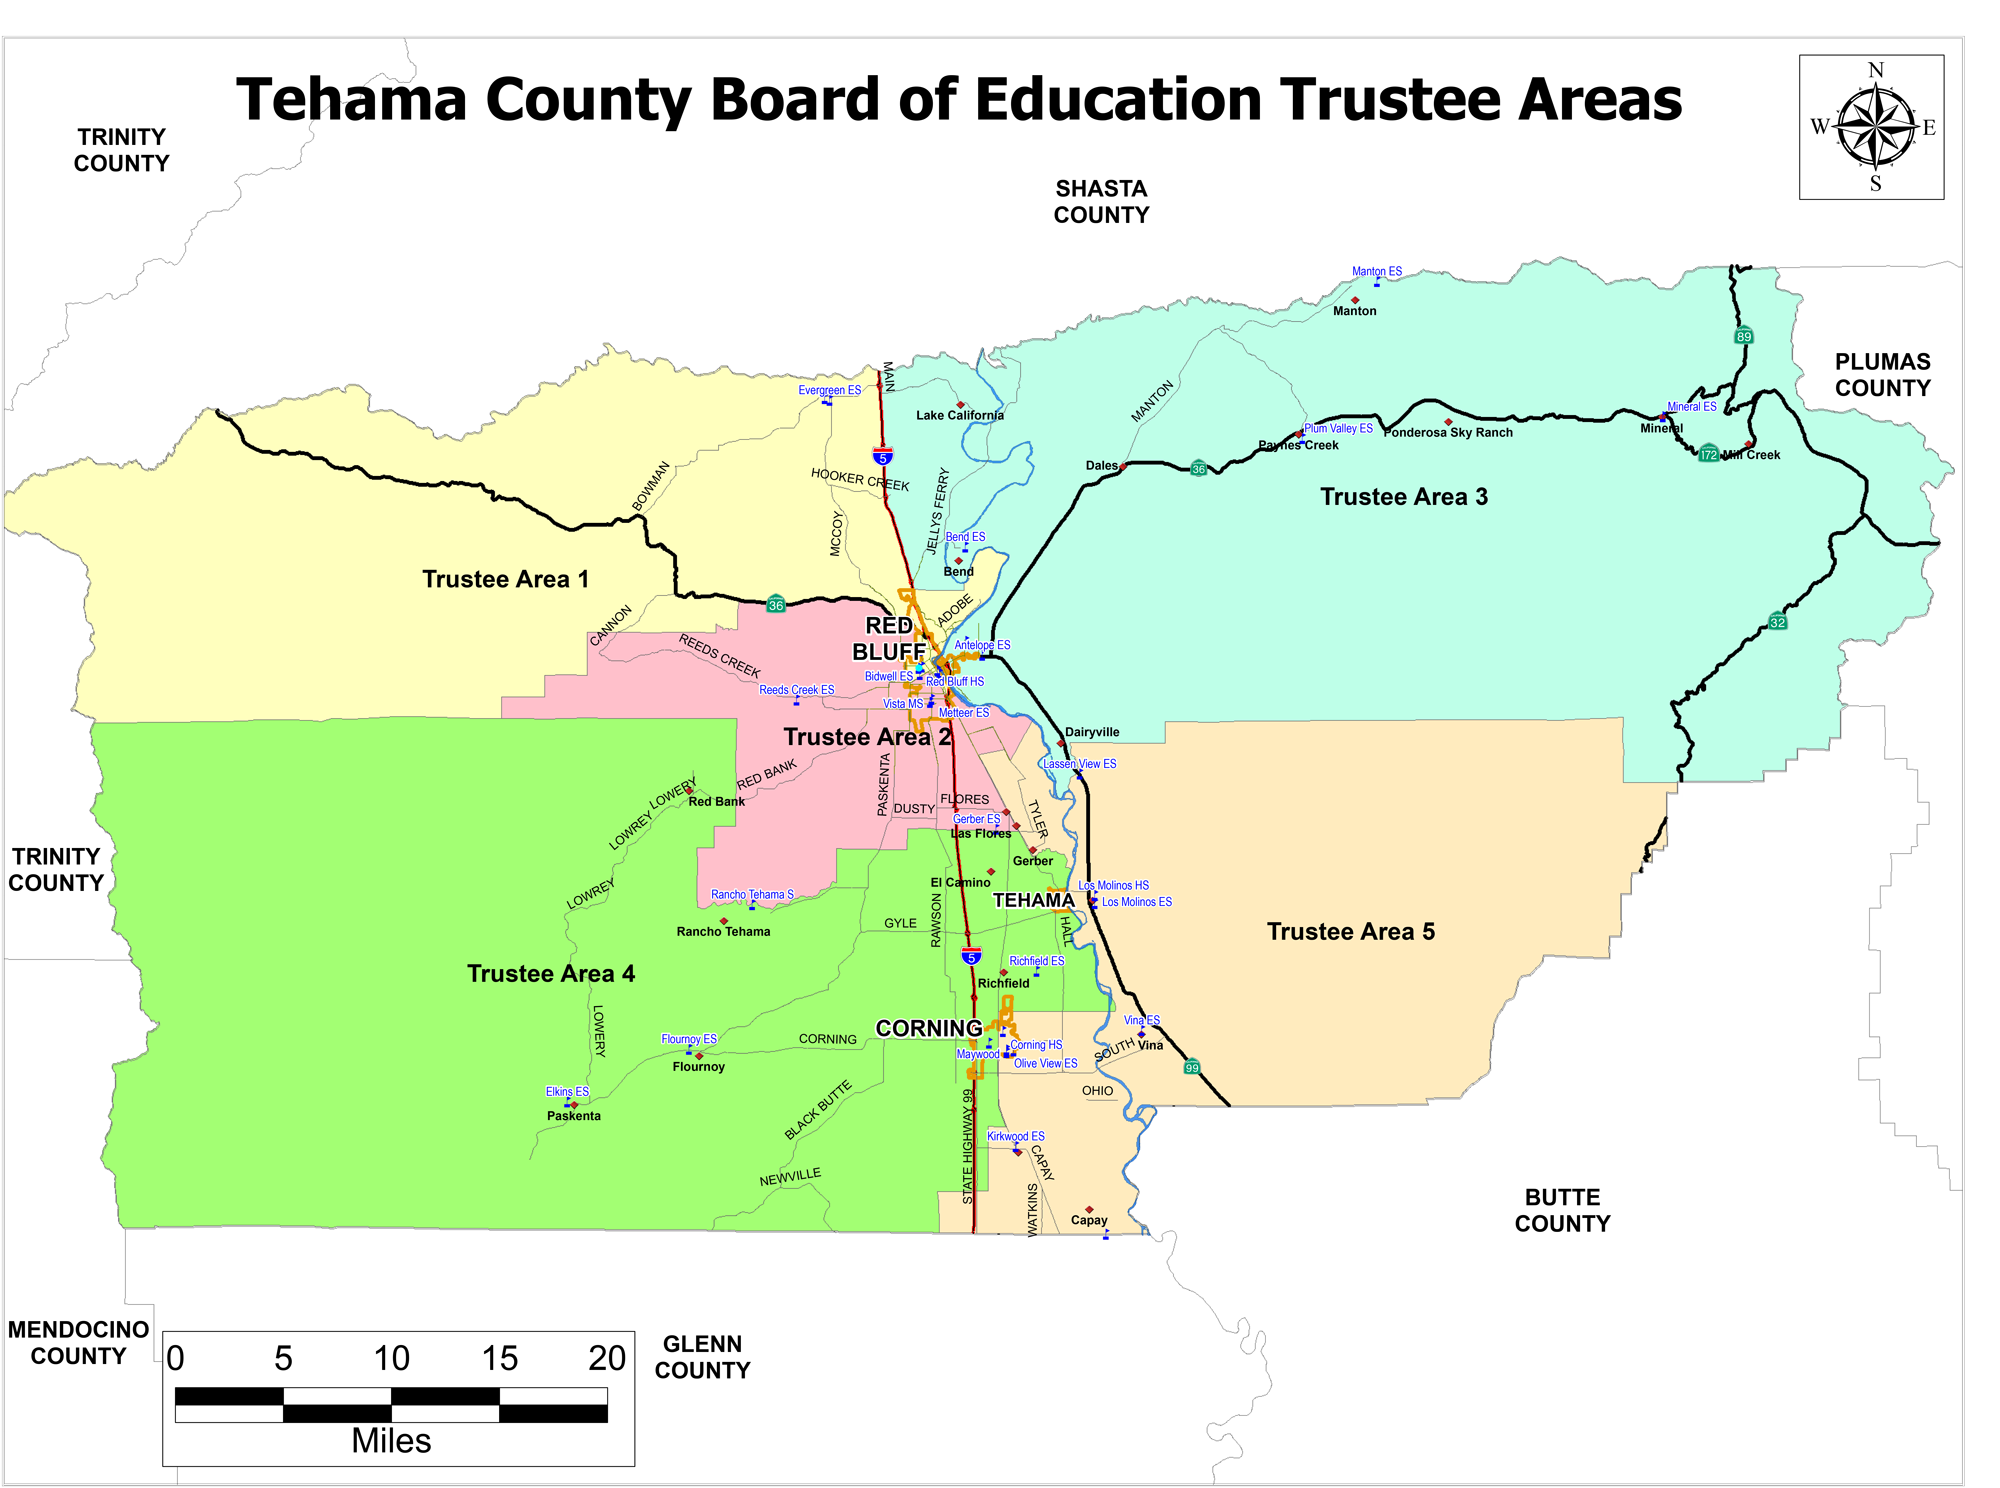 map of tehama county and the trustee areas